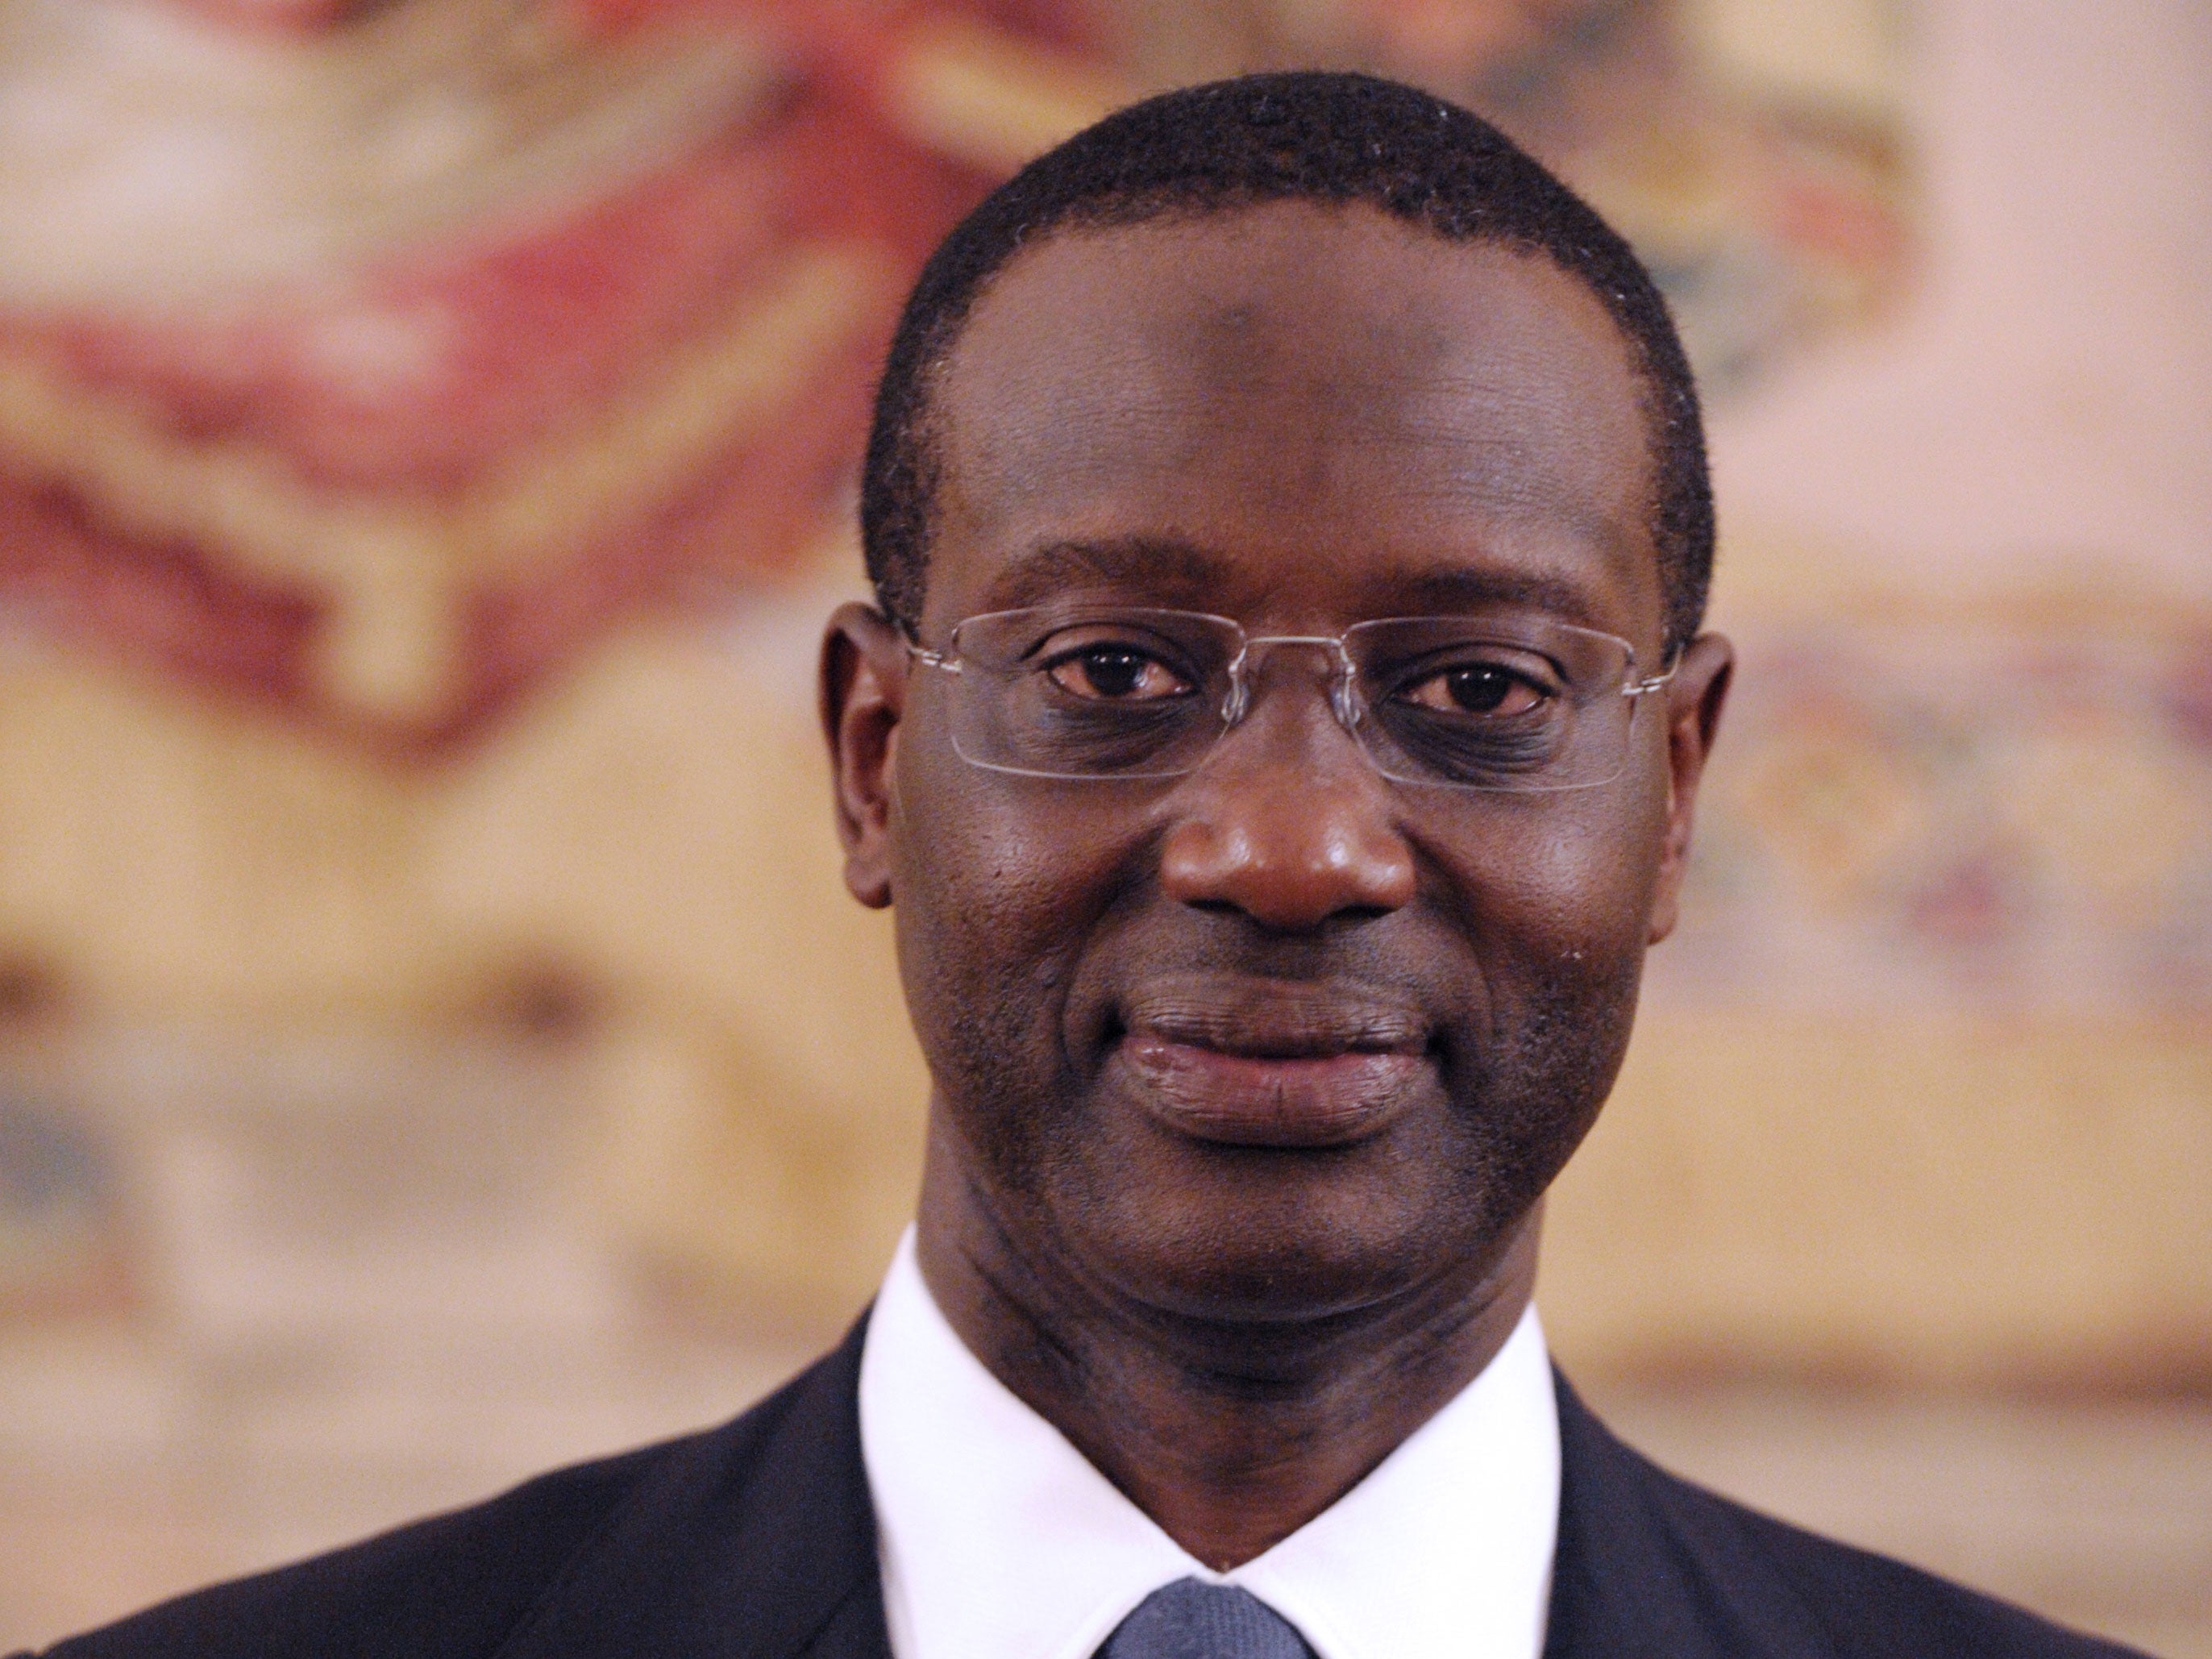 Mr Thiam is one of the most celebrated chief executives in the City